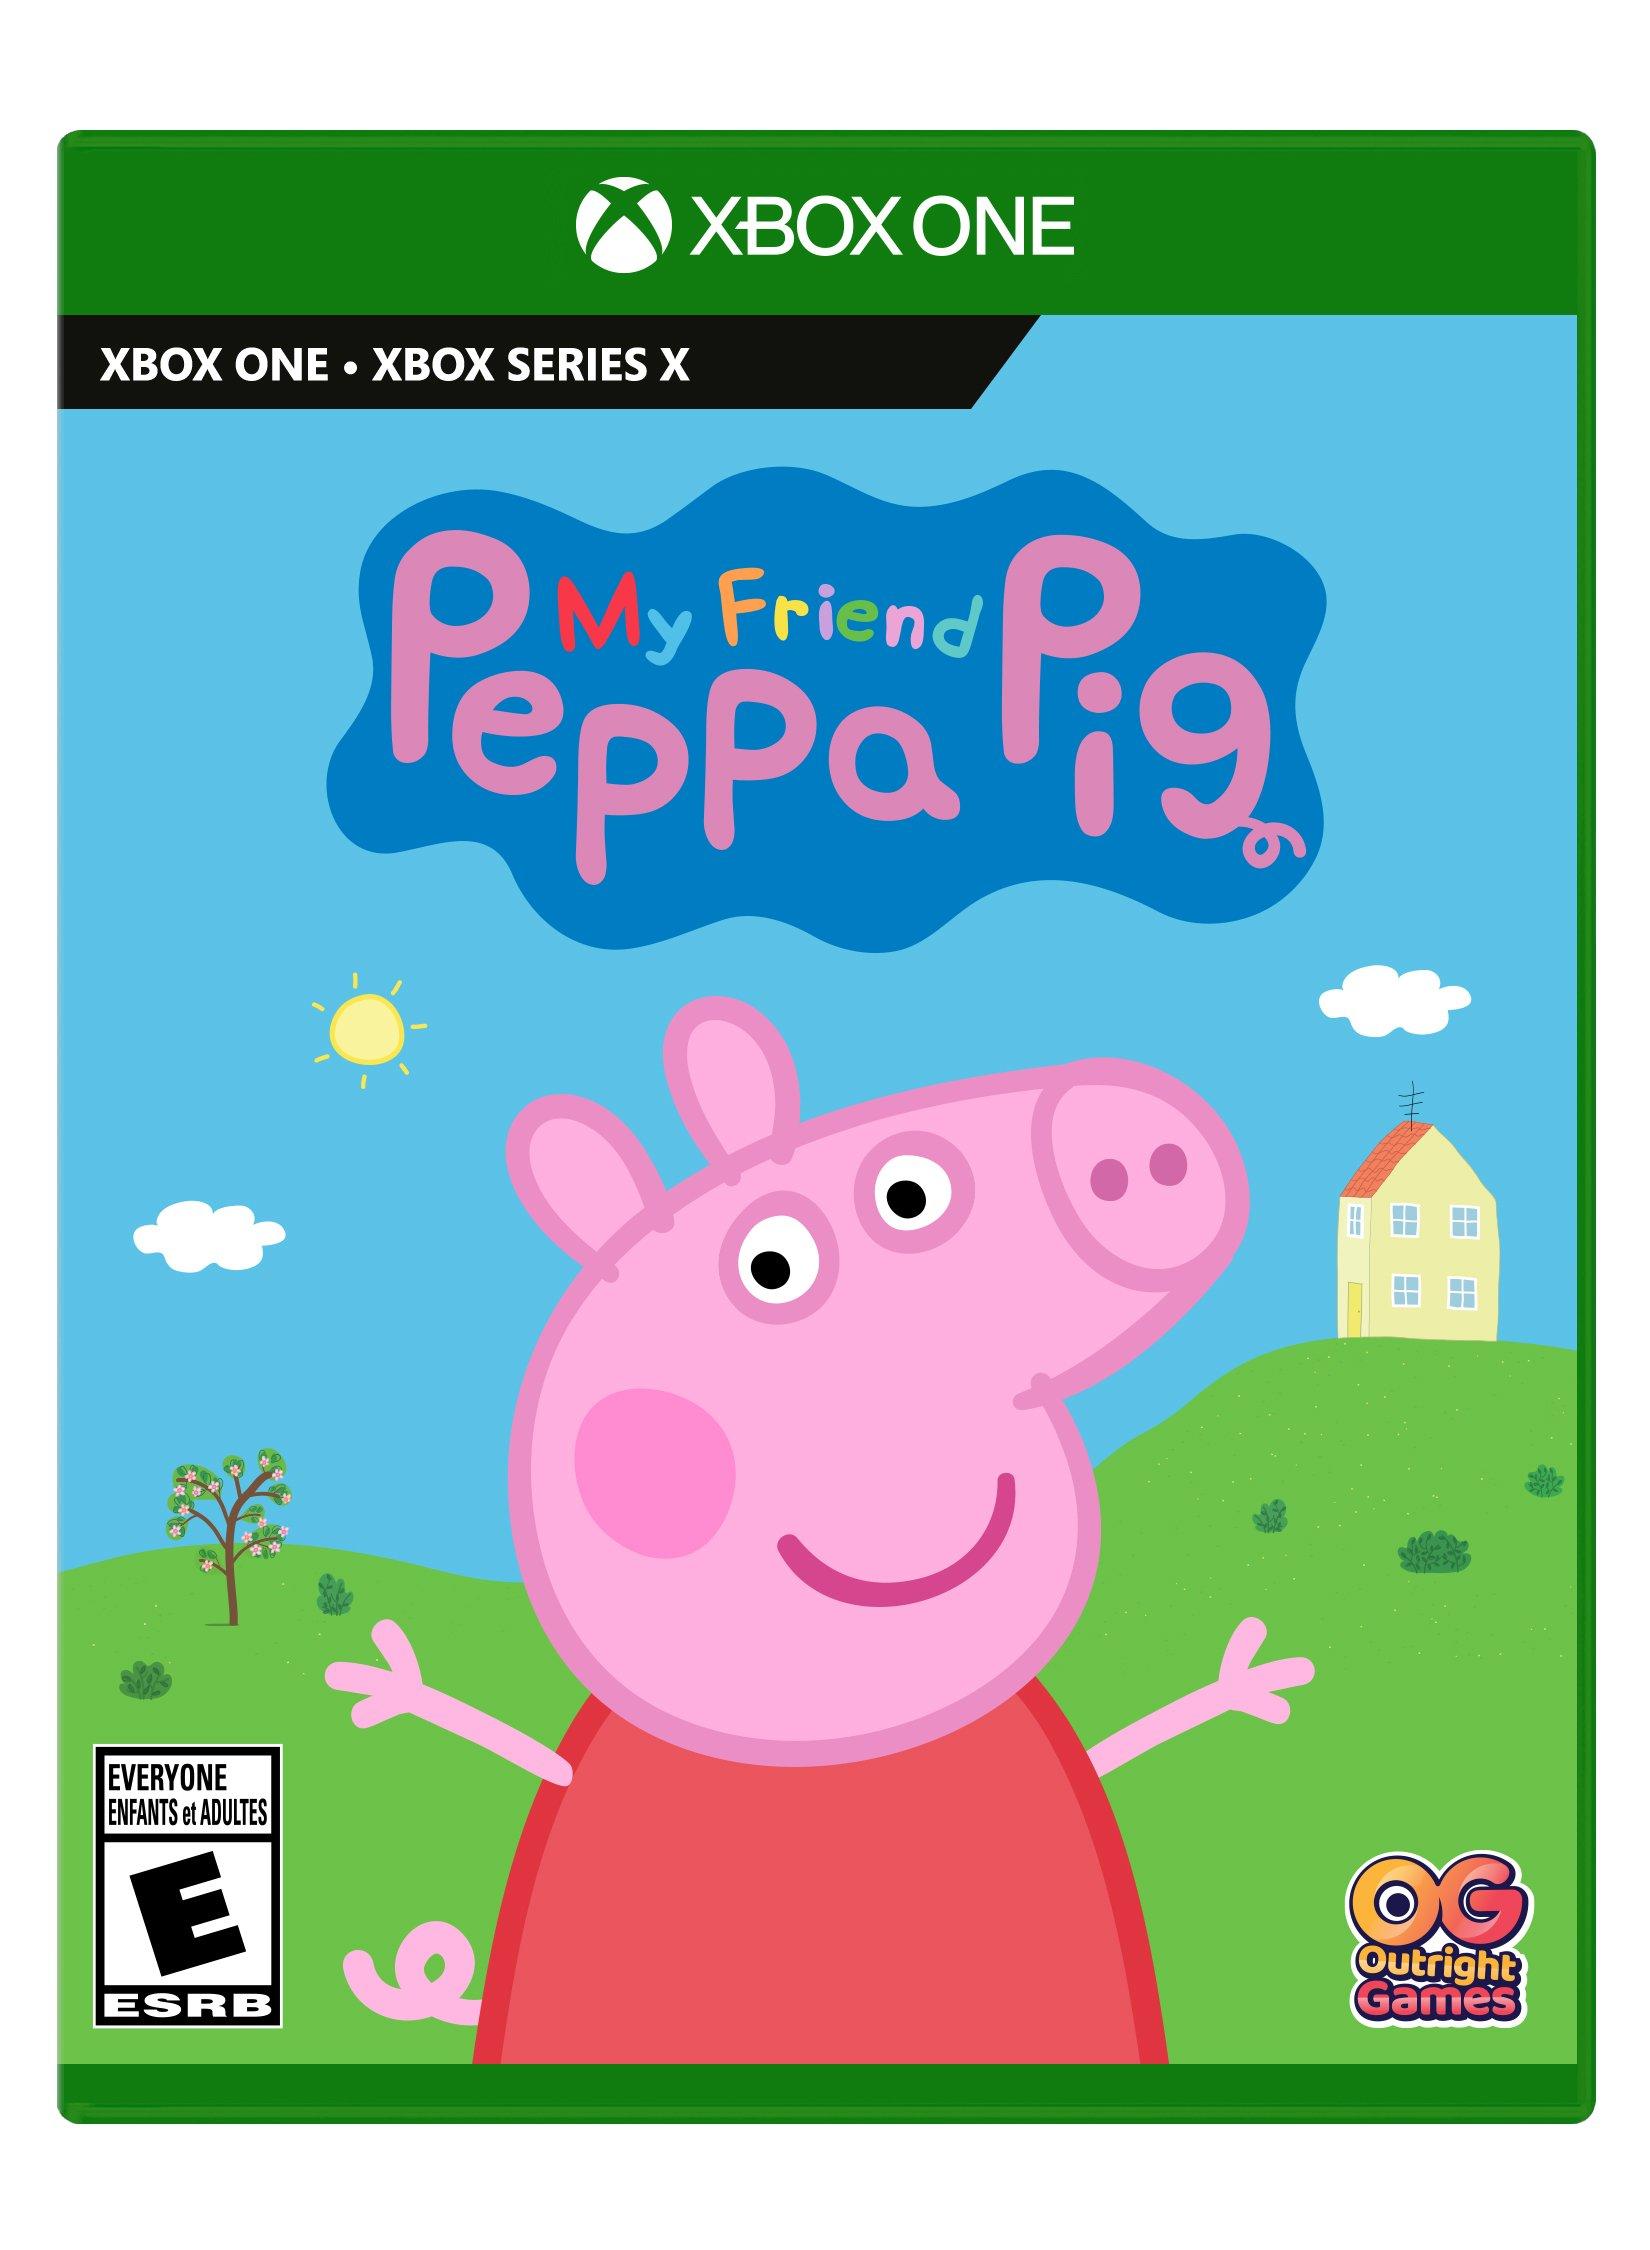 My Friend Peppa Pig - Xbox One (Outright Games), Digital - GameStop